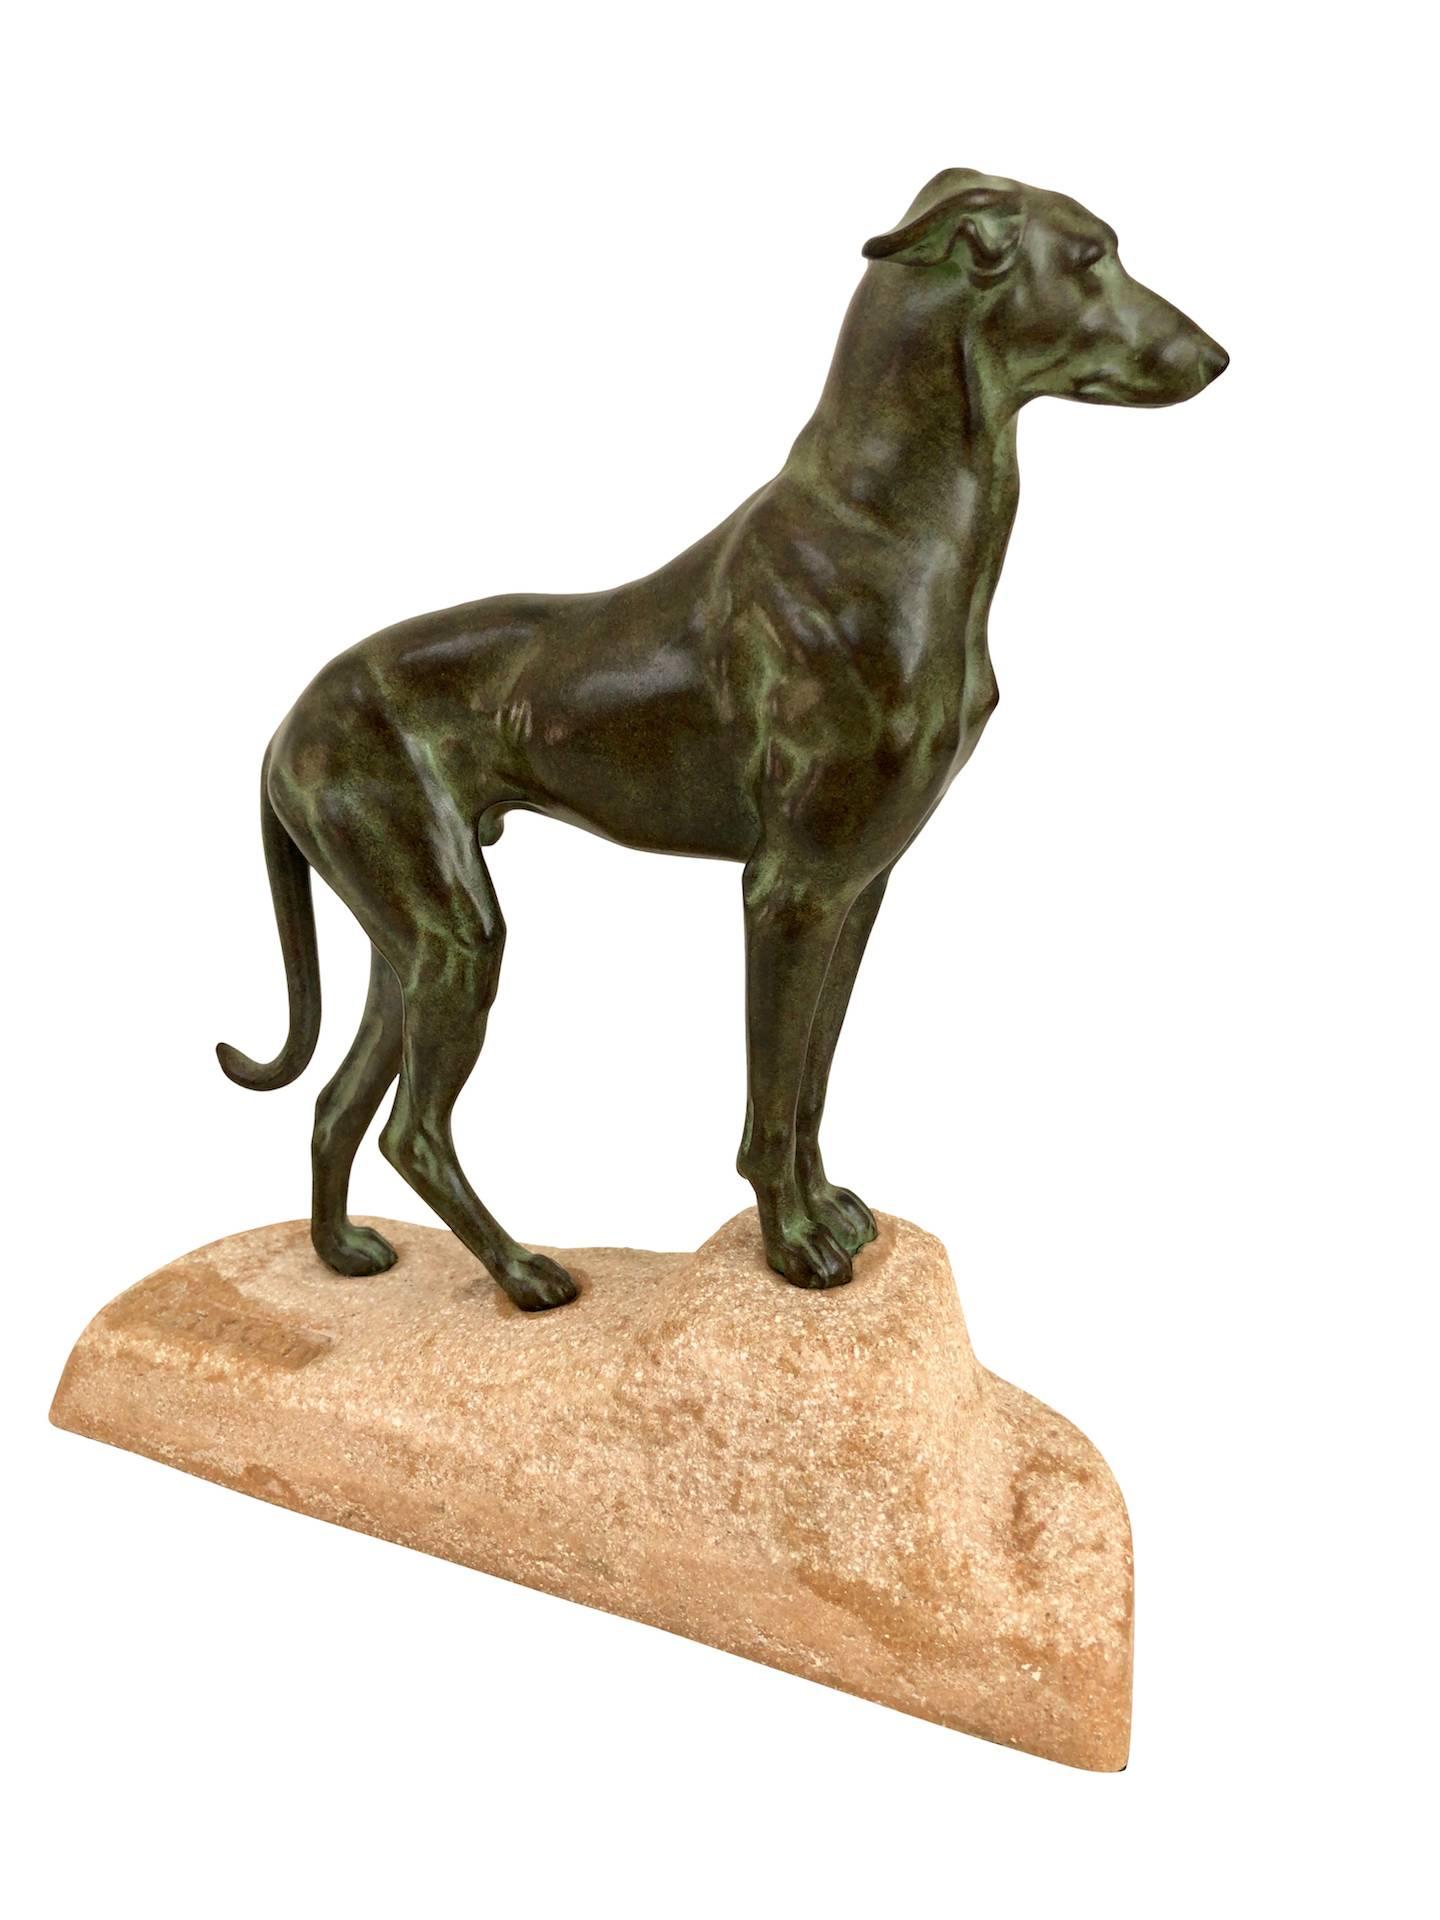 Spelter Greyhound Dog Sculpture Sloughi by Jules Edmond Masson for Max Le Verrier